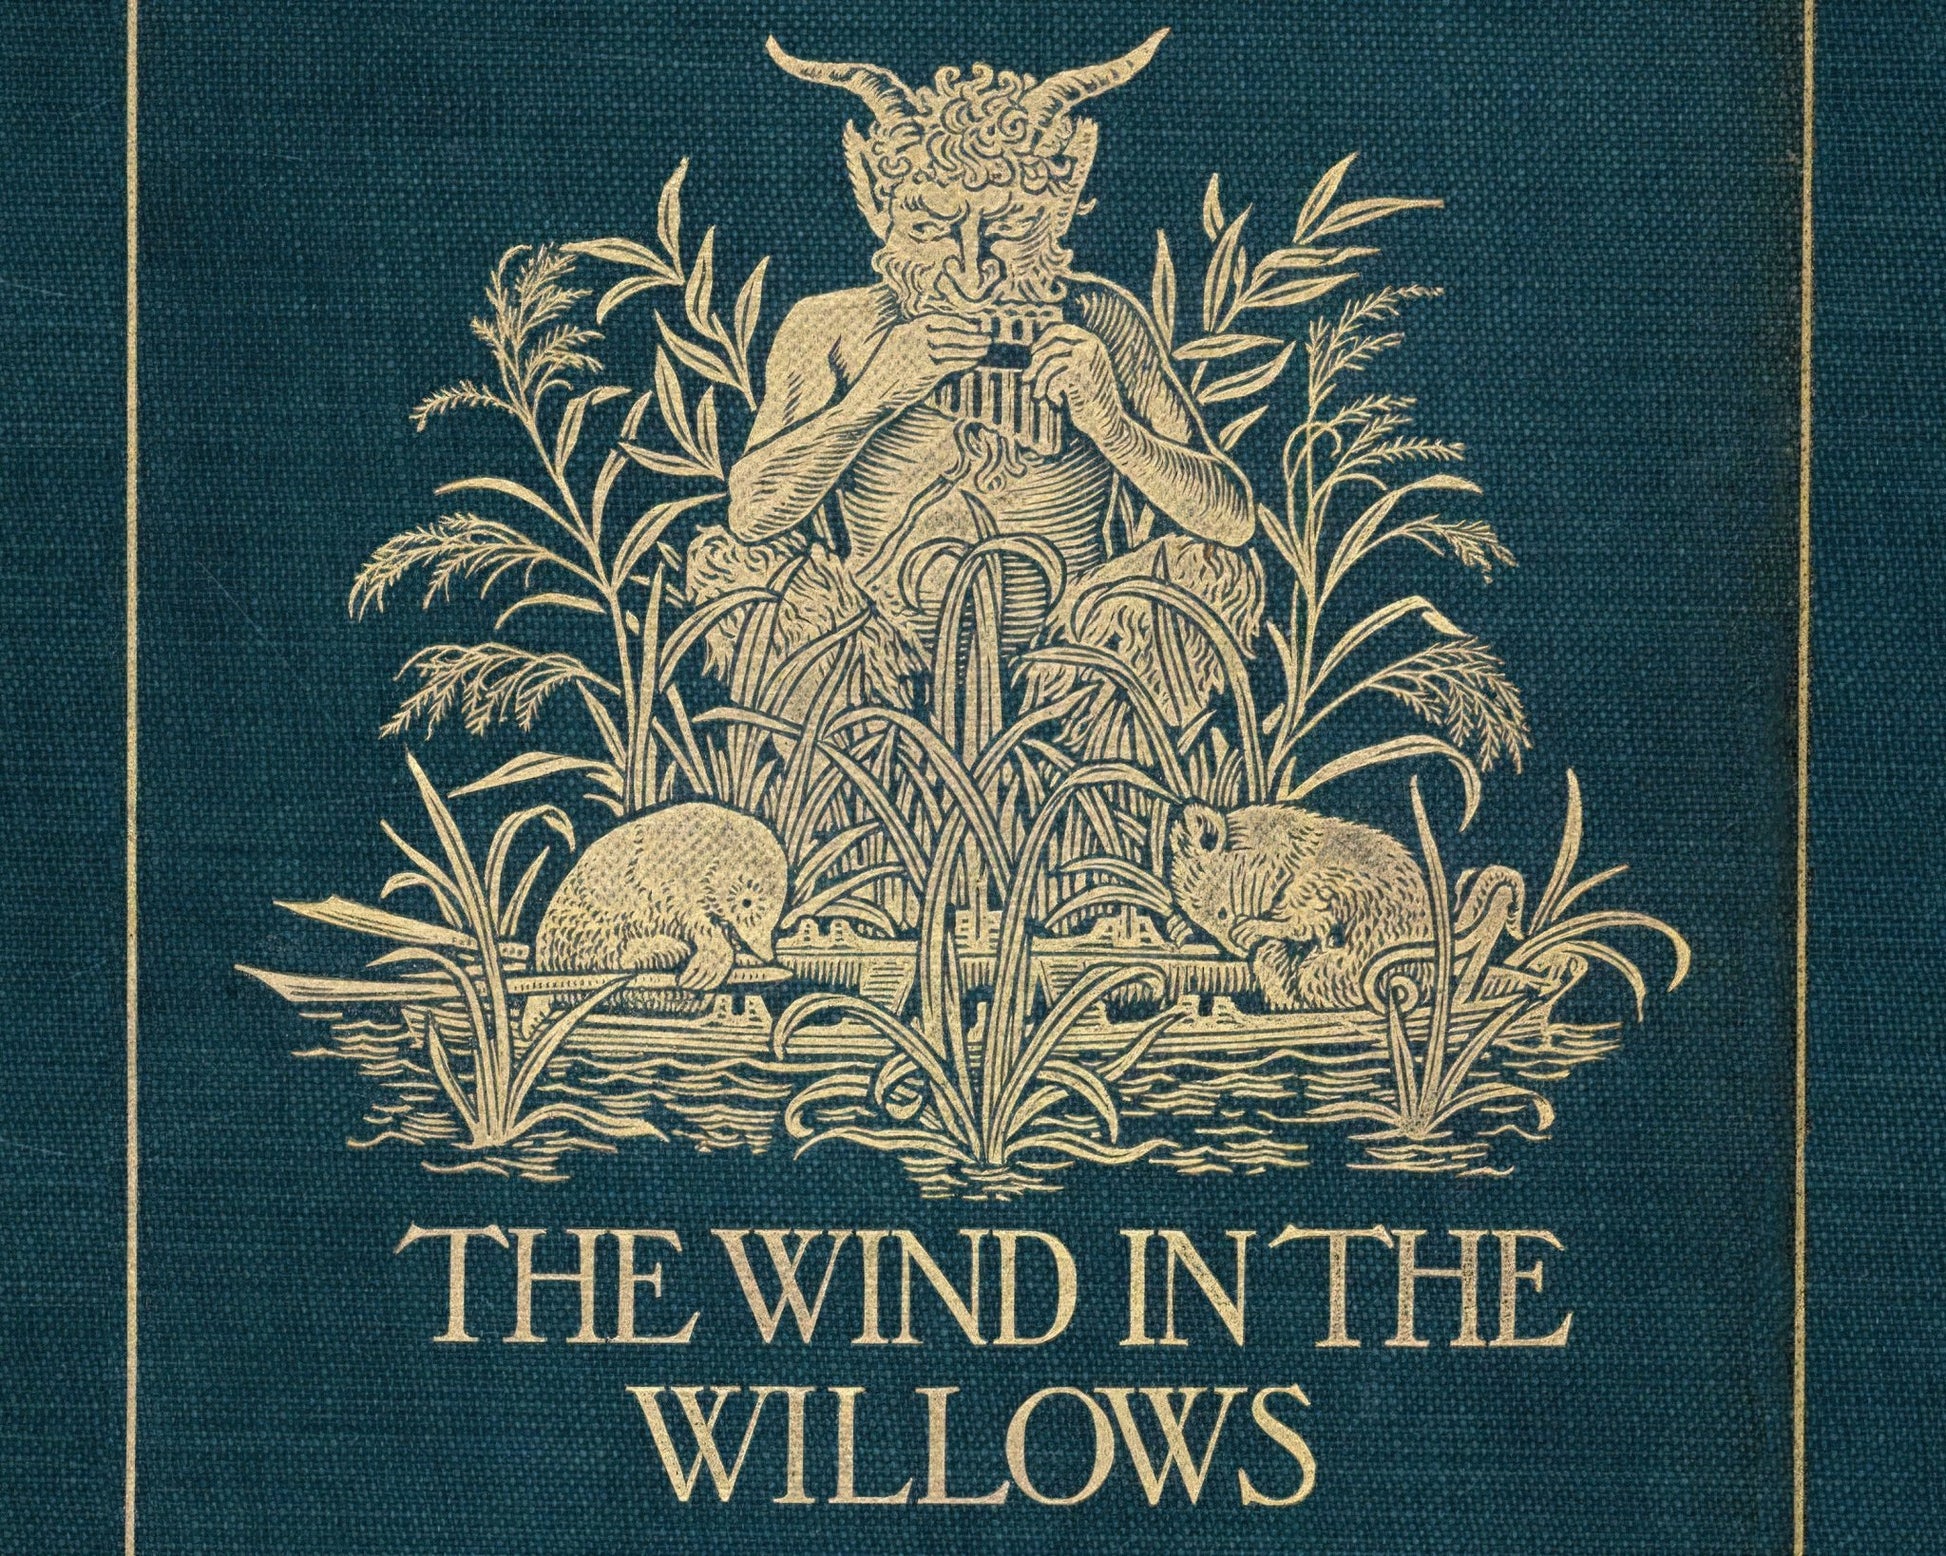 Kenneth Grahame "The Wind in The Willows" (c.1908) - Mabon Gallery